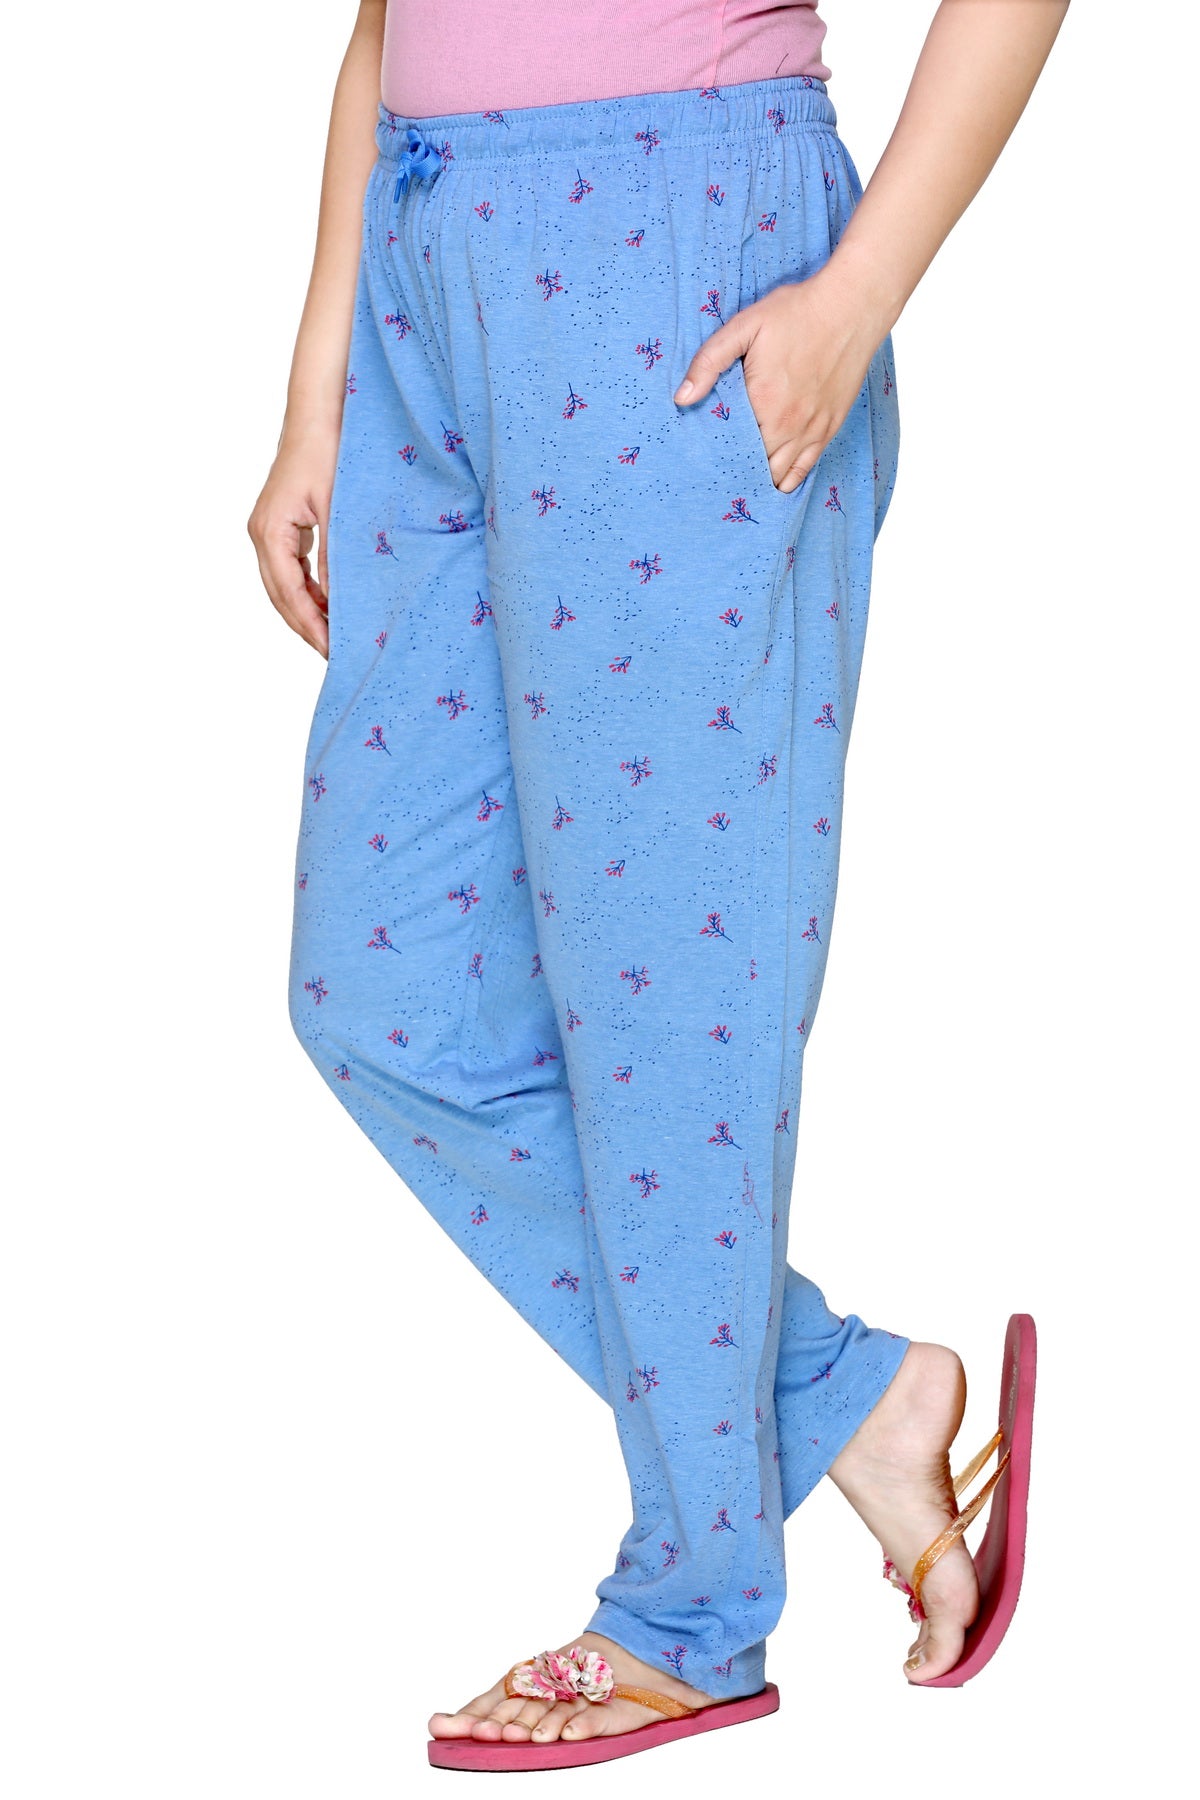 Buy Stylish Black Printed Cotton Capri/Pajama For Women Online In India -  Cupidclothing's – Cupid Clothings